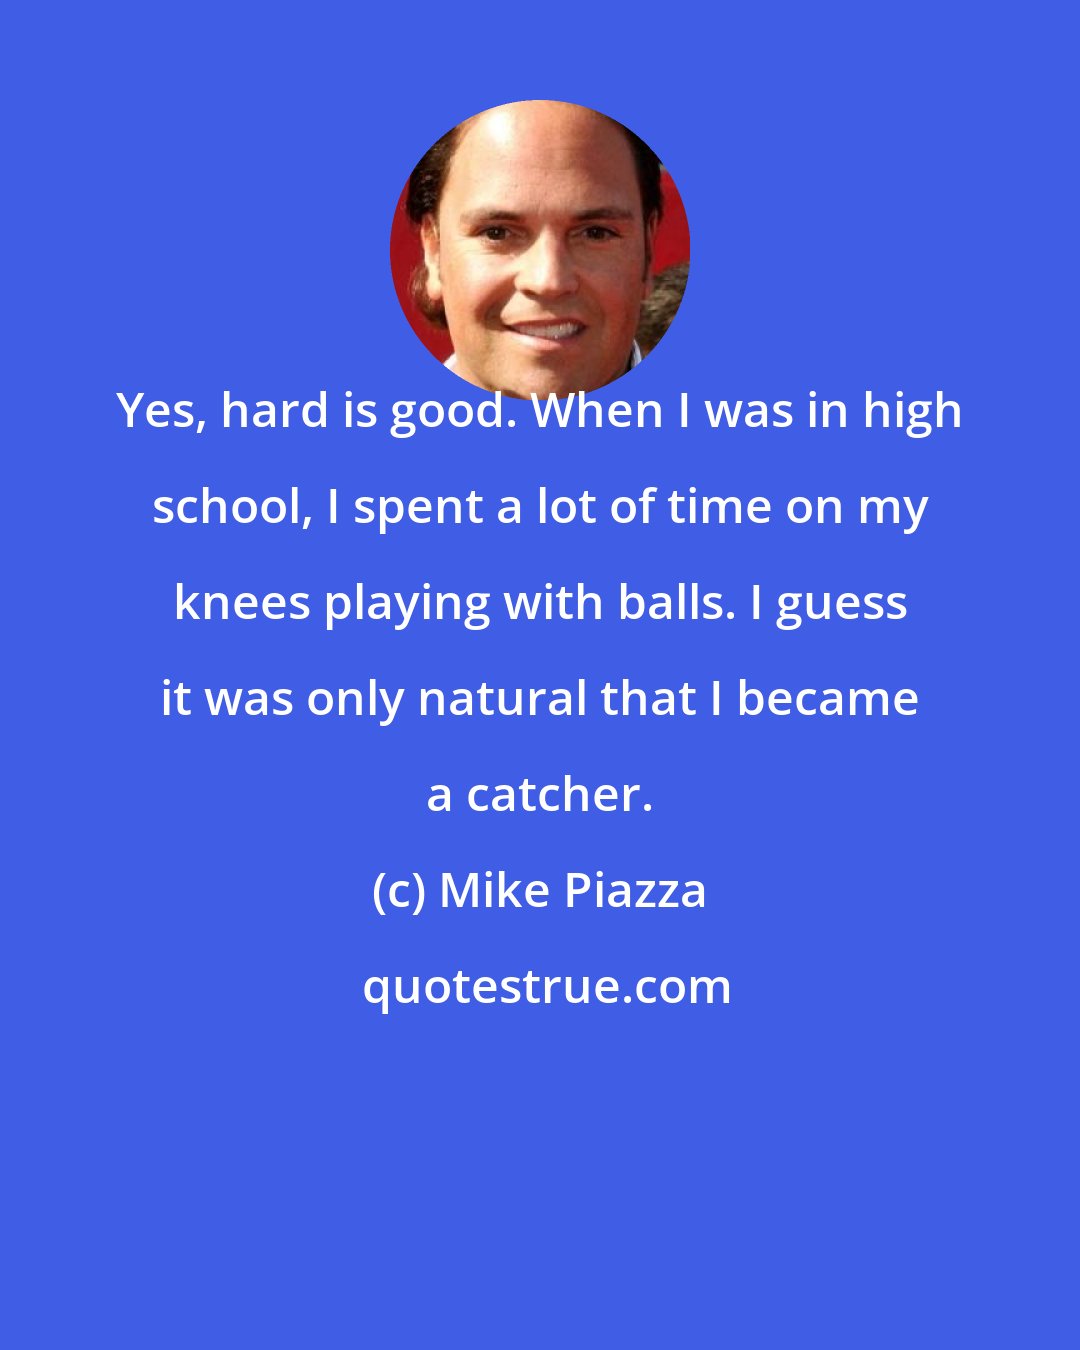 Mike Piazza: Yes, hard is good. When I was in high school, I spent a lot of time on my knees playing with balls. I guess it was only natural that I became a catcher.